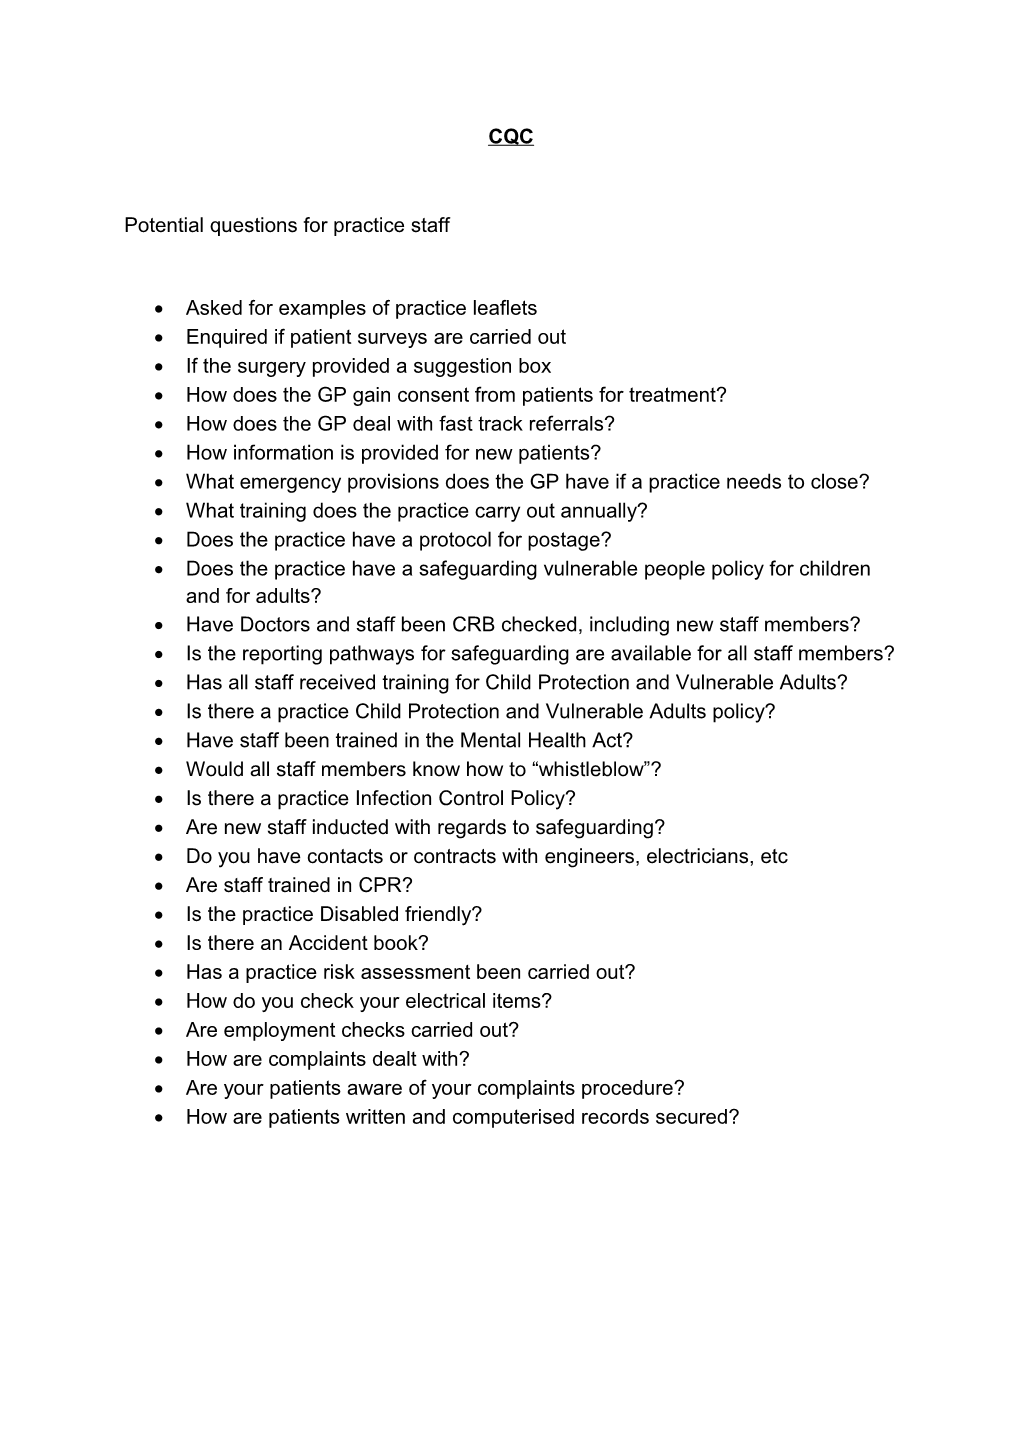 Potential Questions for Practice Staff